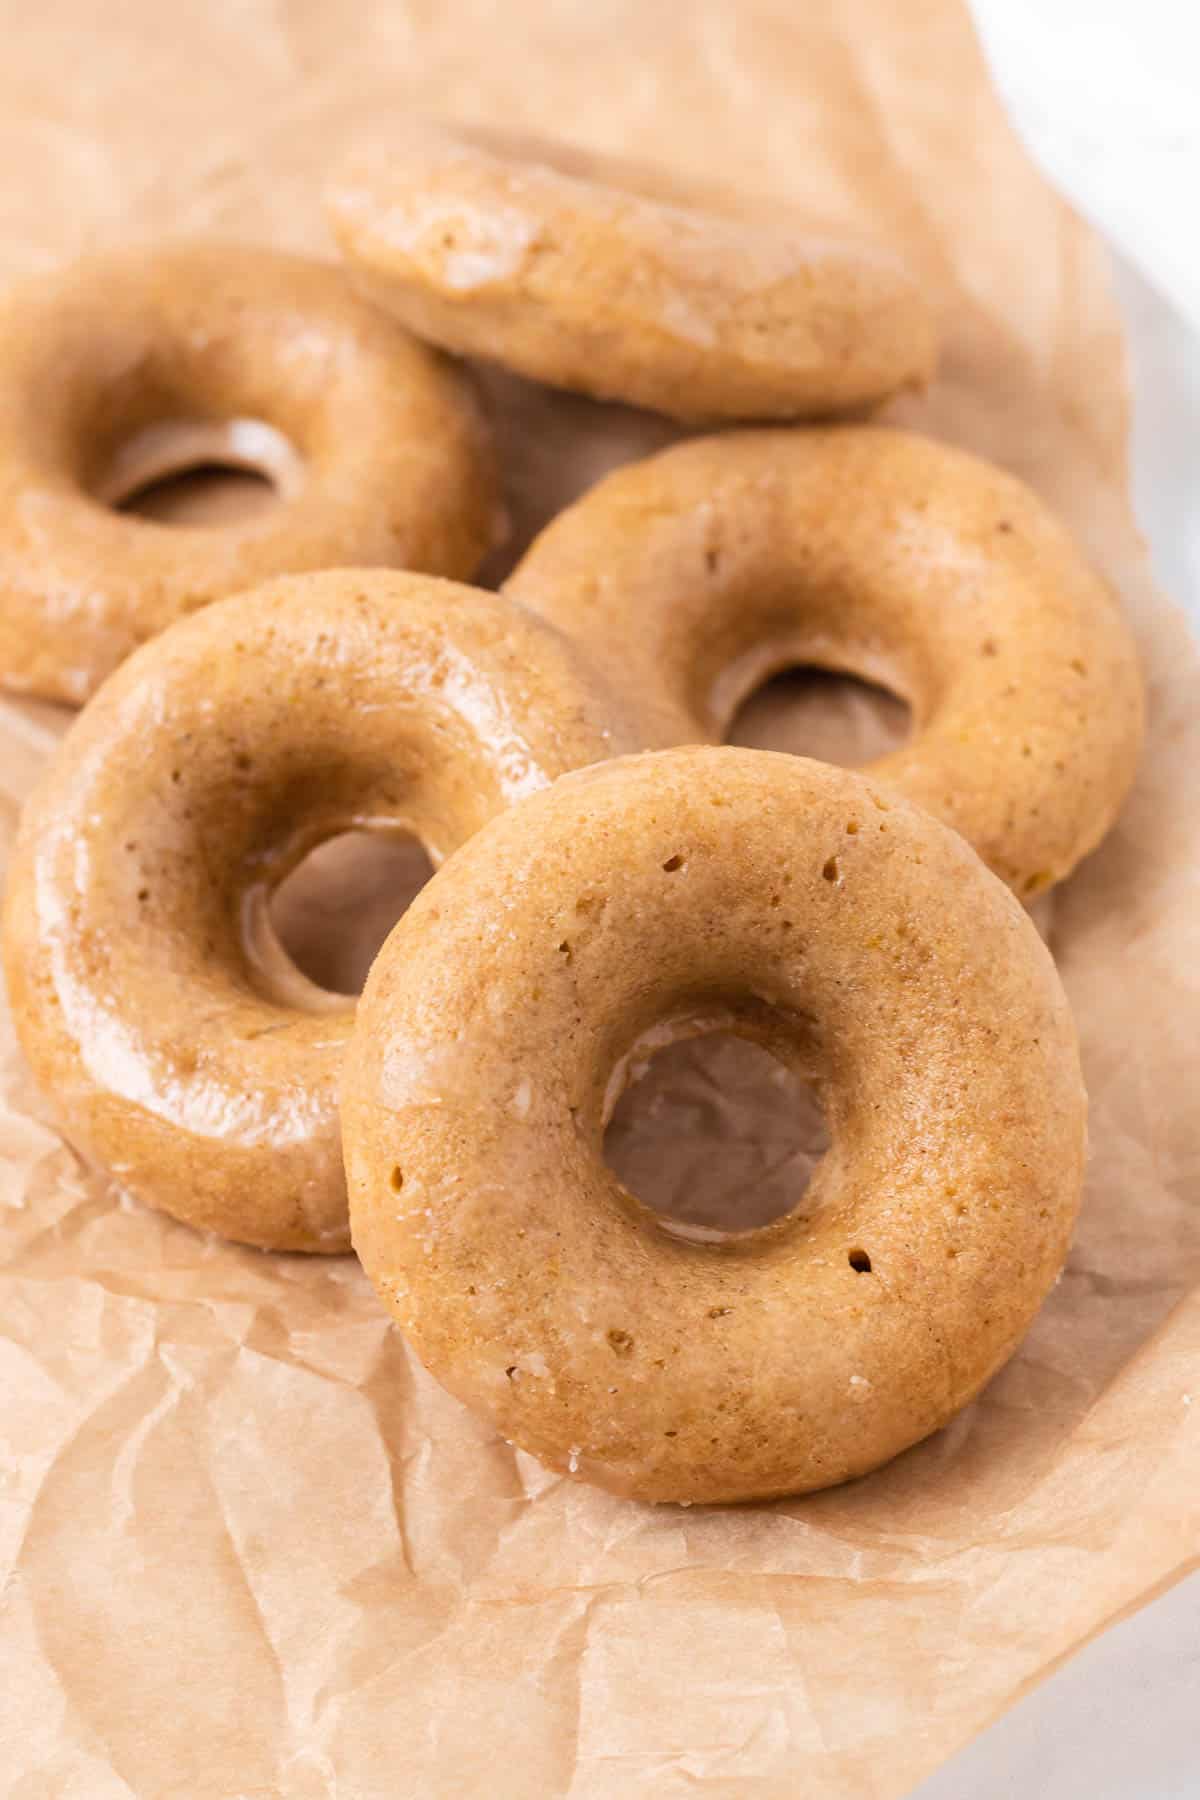 Pile of light brown donuts on a brown paper.